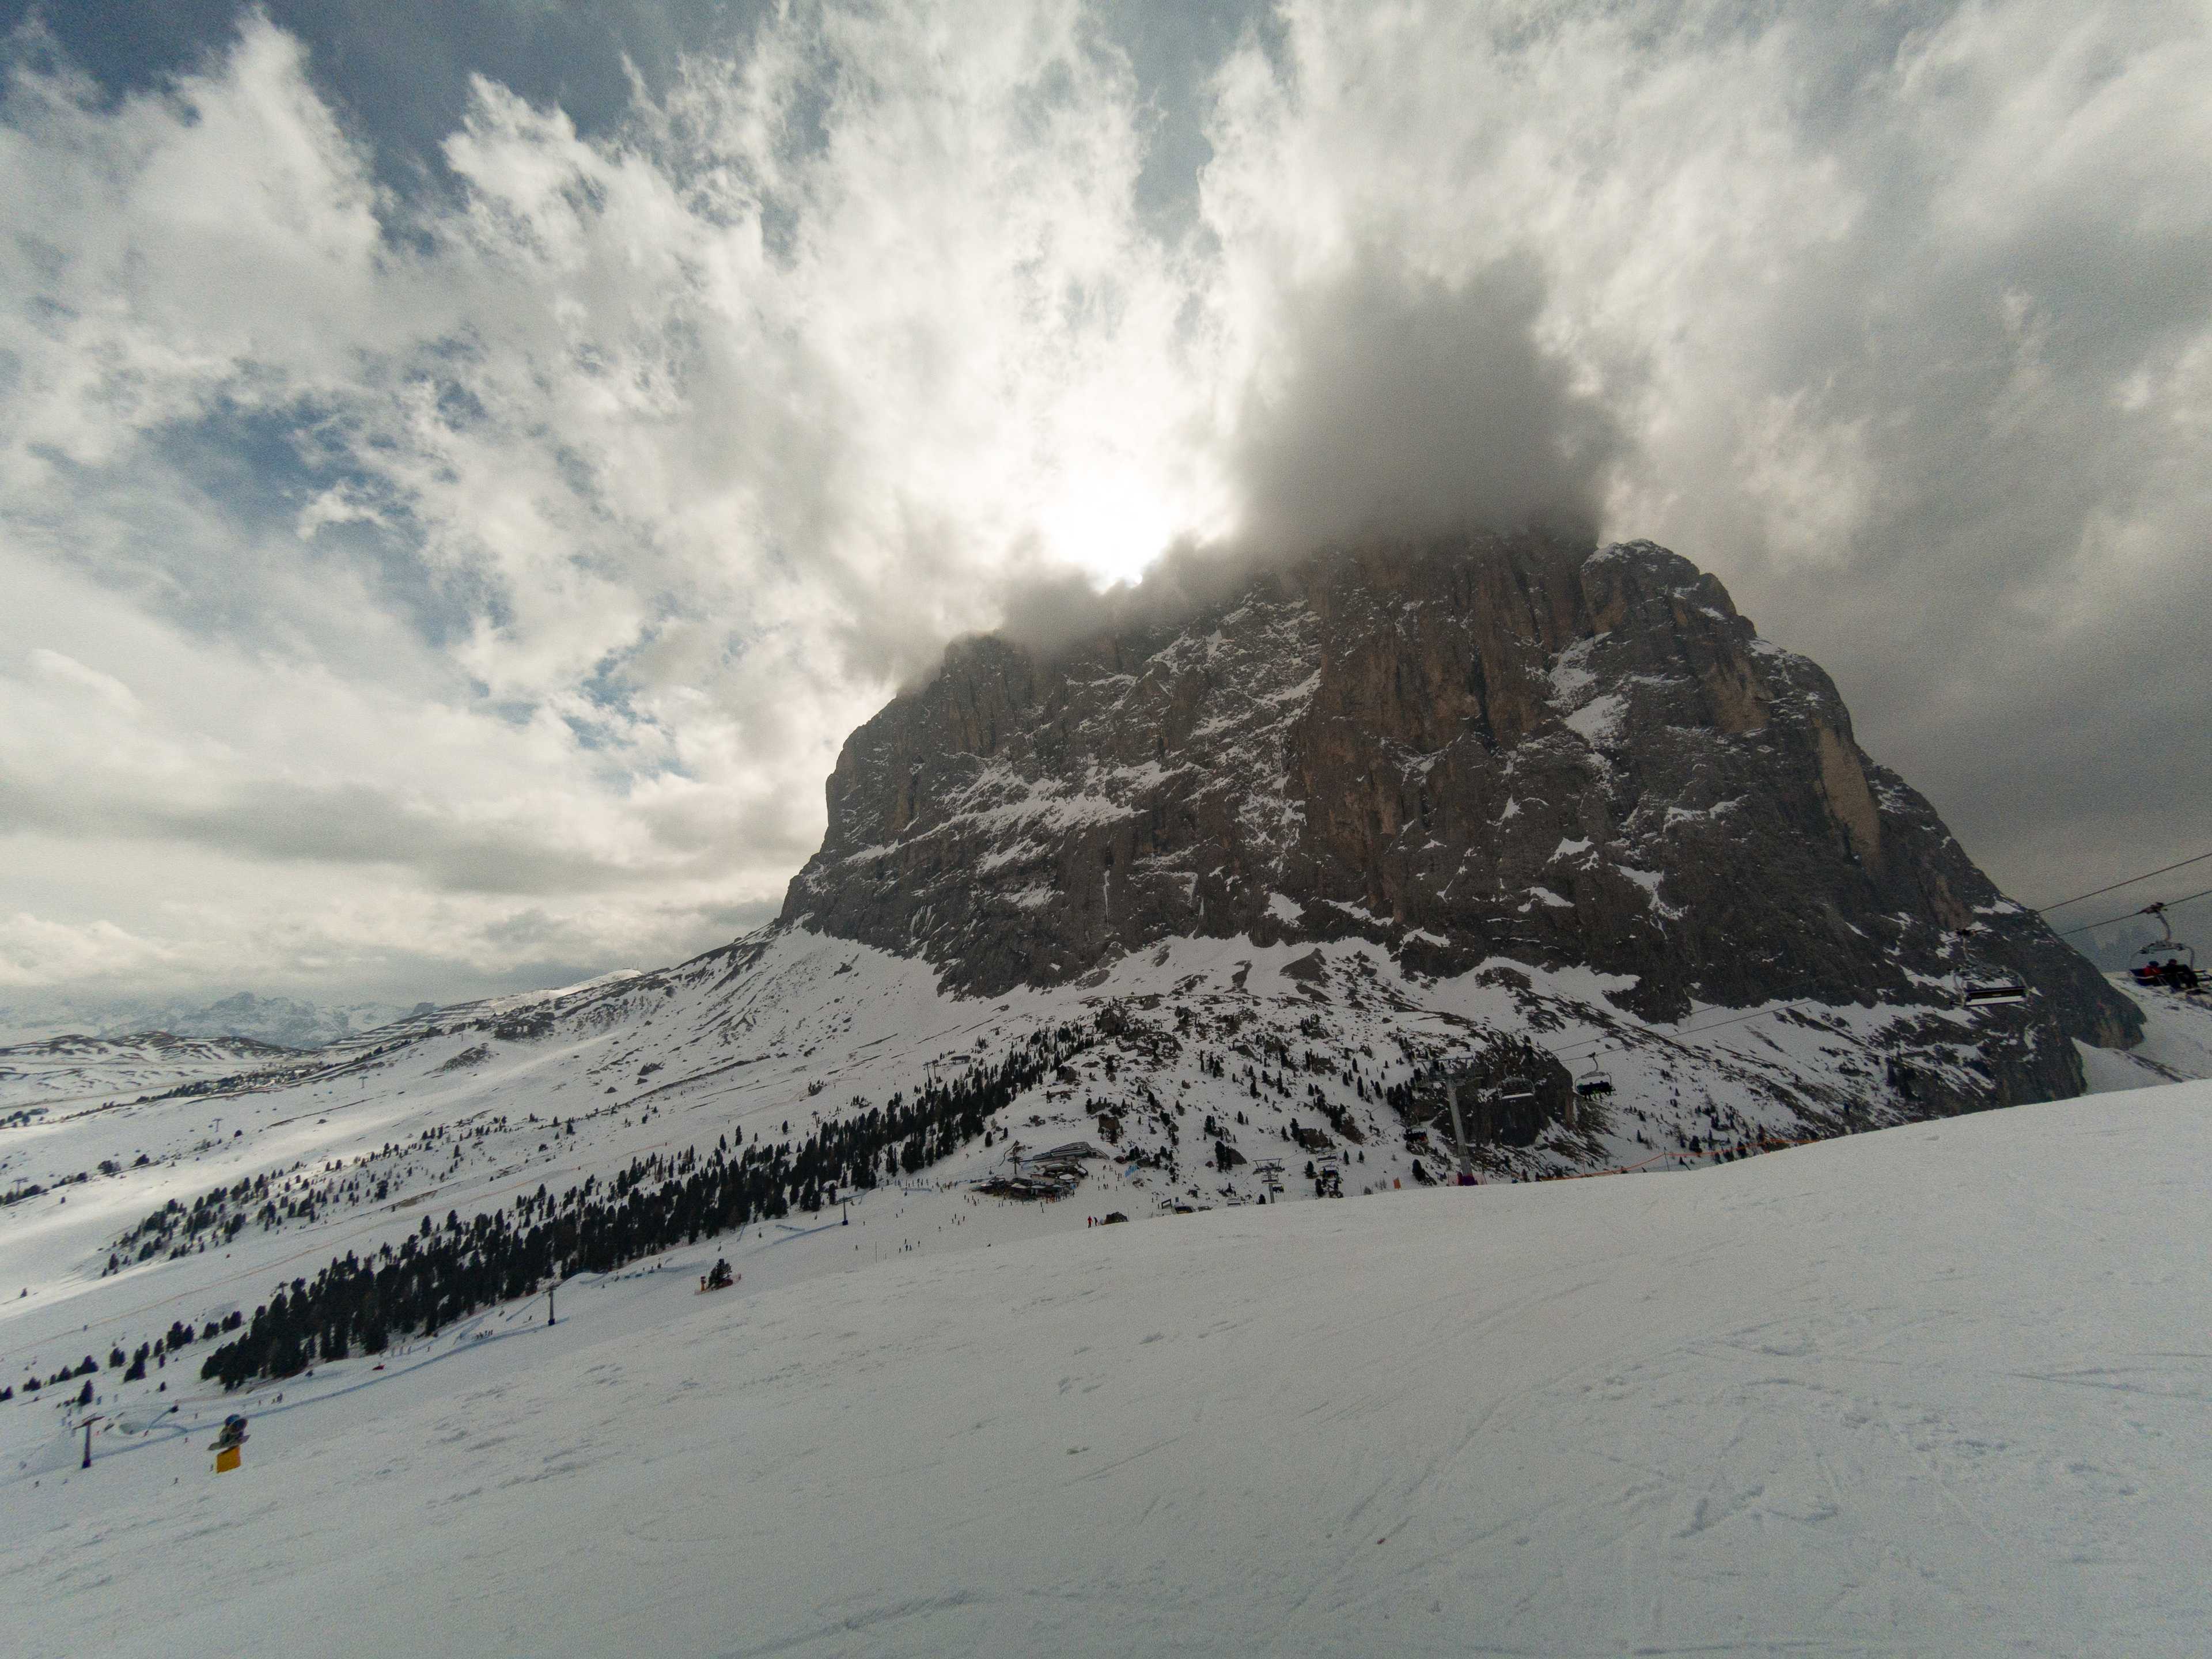 The view from Piz Sella (2284 m a.s.l.), Val Gardena